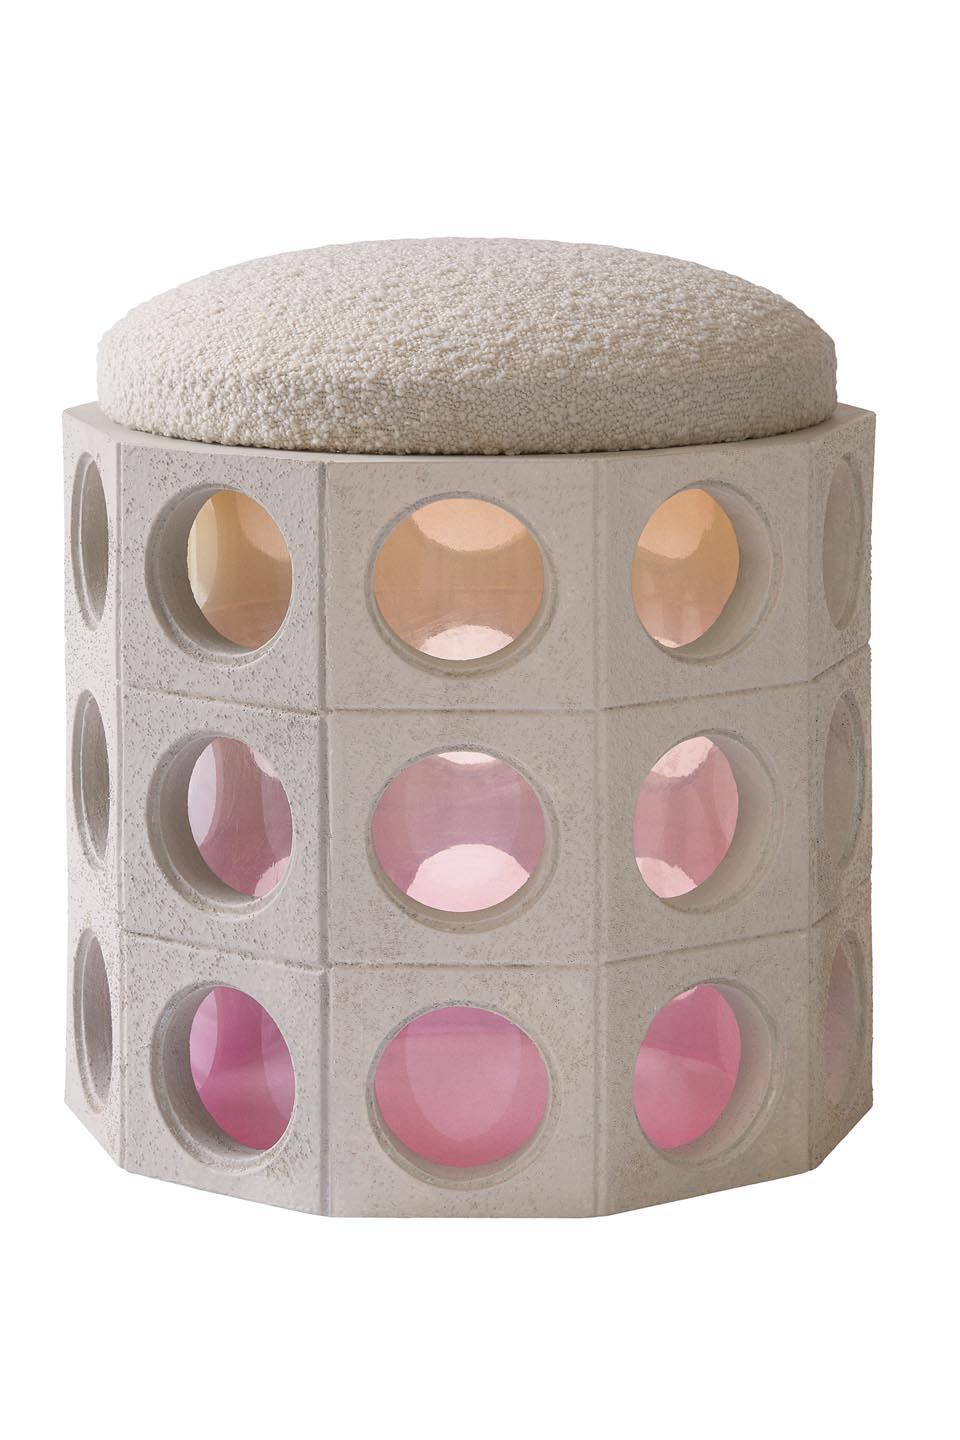 Element Purple Pouf by Patricia Bustos de la Torre
Dimensions: D 40 x W 40 x H 46 cm. SH: 46 cm.
Materials: Methacrylate, bricks and cloth.

A pouf inspired by the architecture of Jean Prouvé and the brutalism of the
time, an ode to concrete and